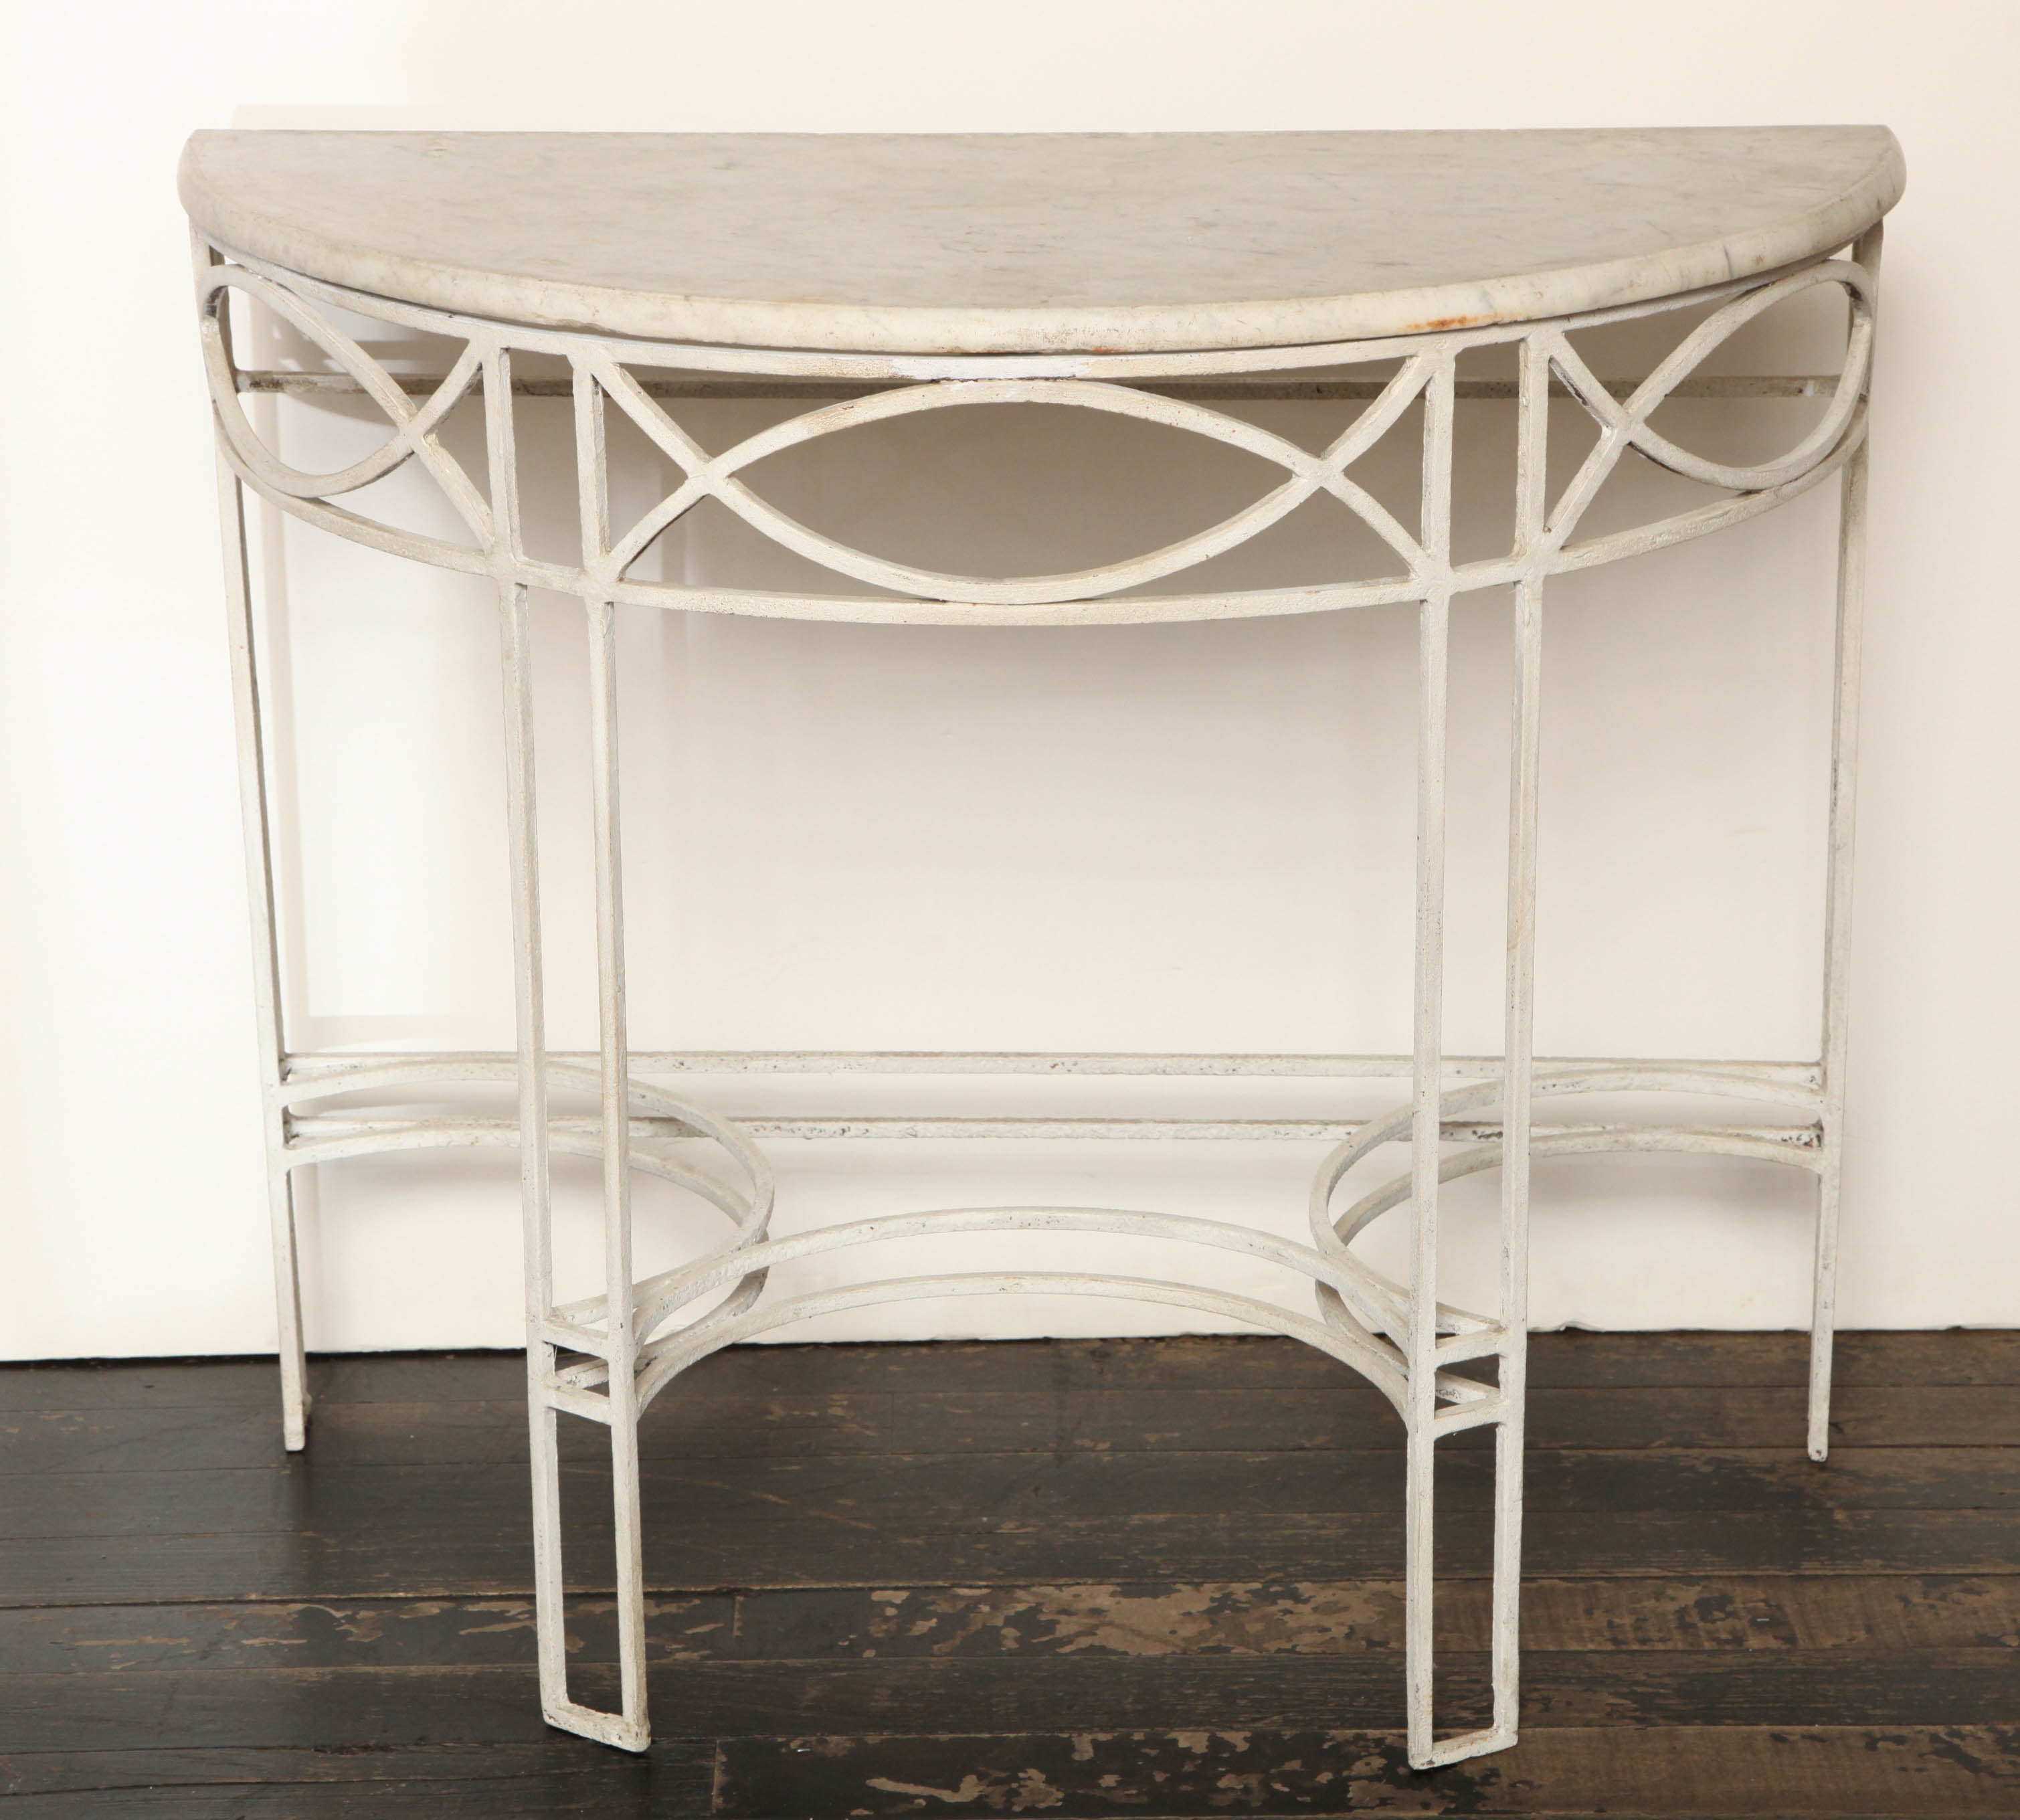 1930s English Deco Marble and Iron Demilune Console